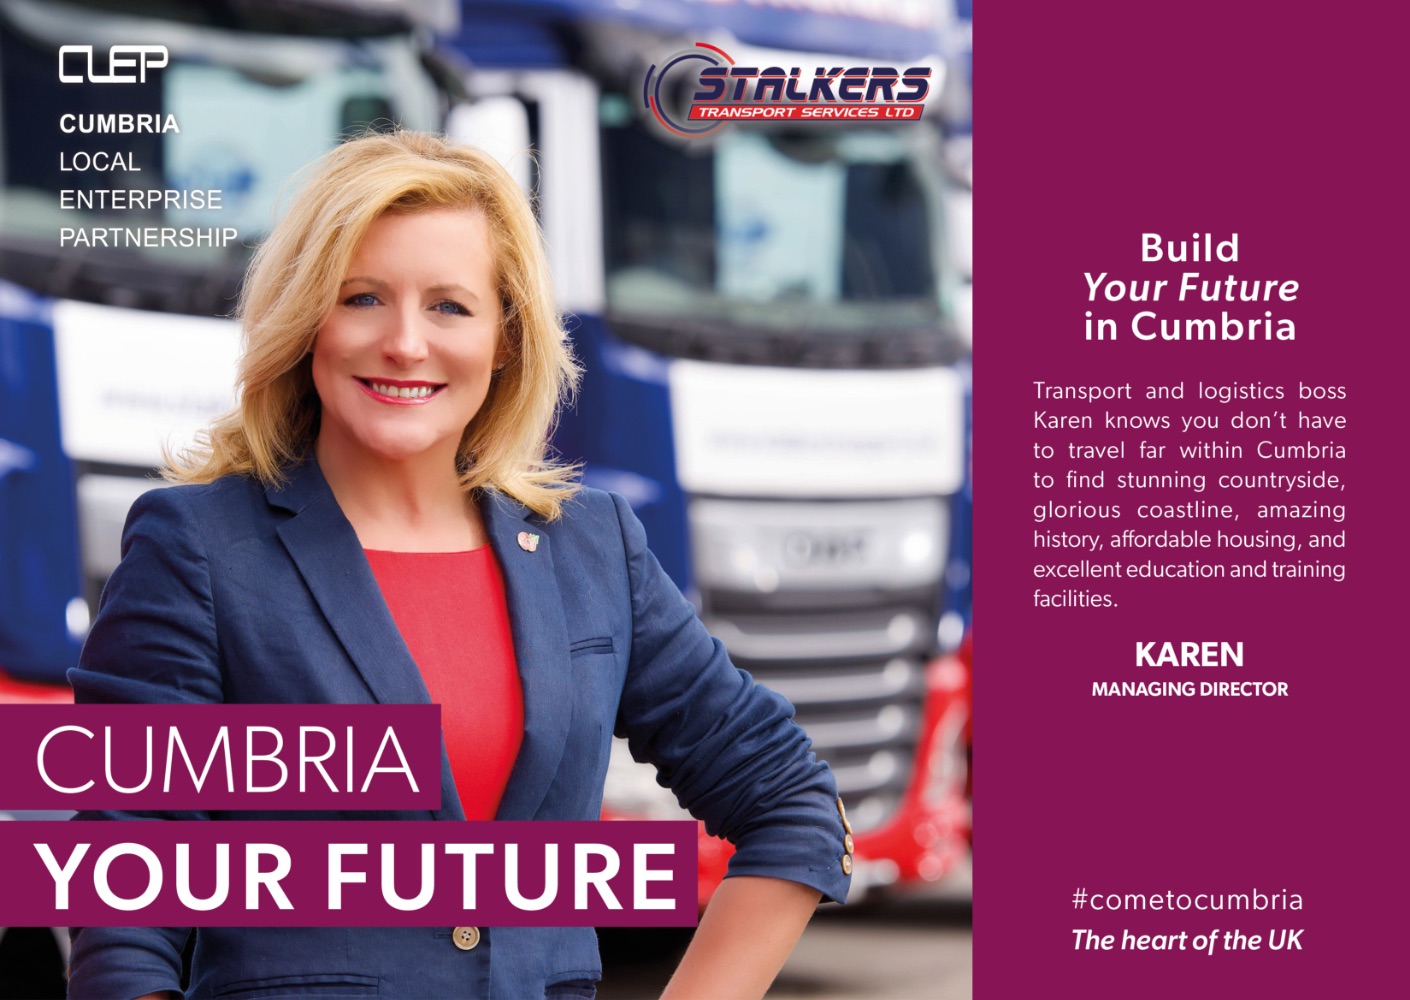 Build Your Future In Cumbria: Transport and logistics boss Karen knows you don't have to travel far within Cumbria to find stunning countryside, glorious coastline, amazing history, affordable housing, and excellent education and training facilities. (Photo: Karen, managing director).